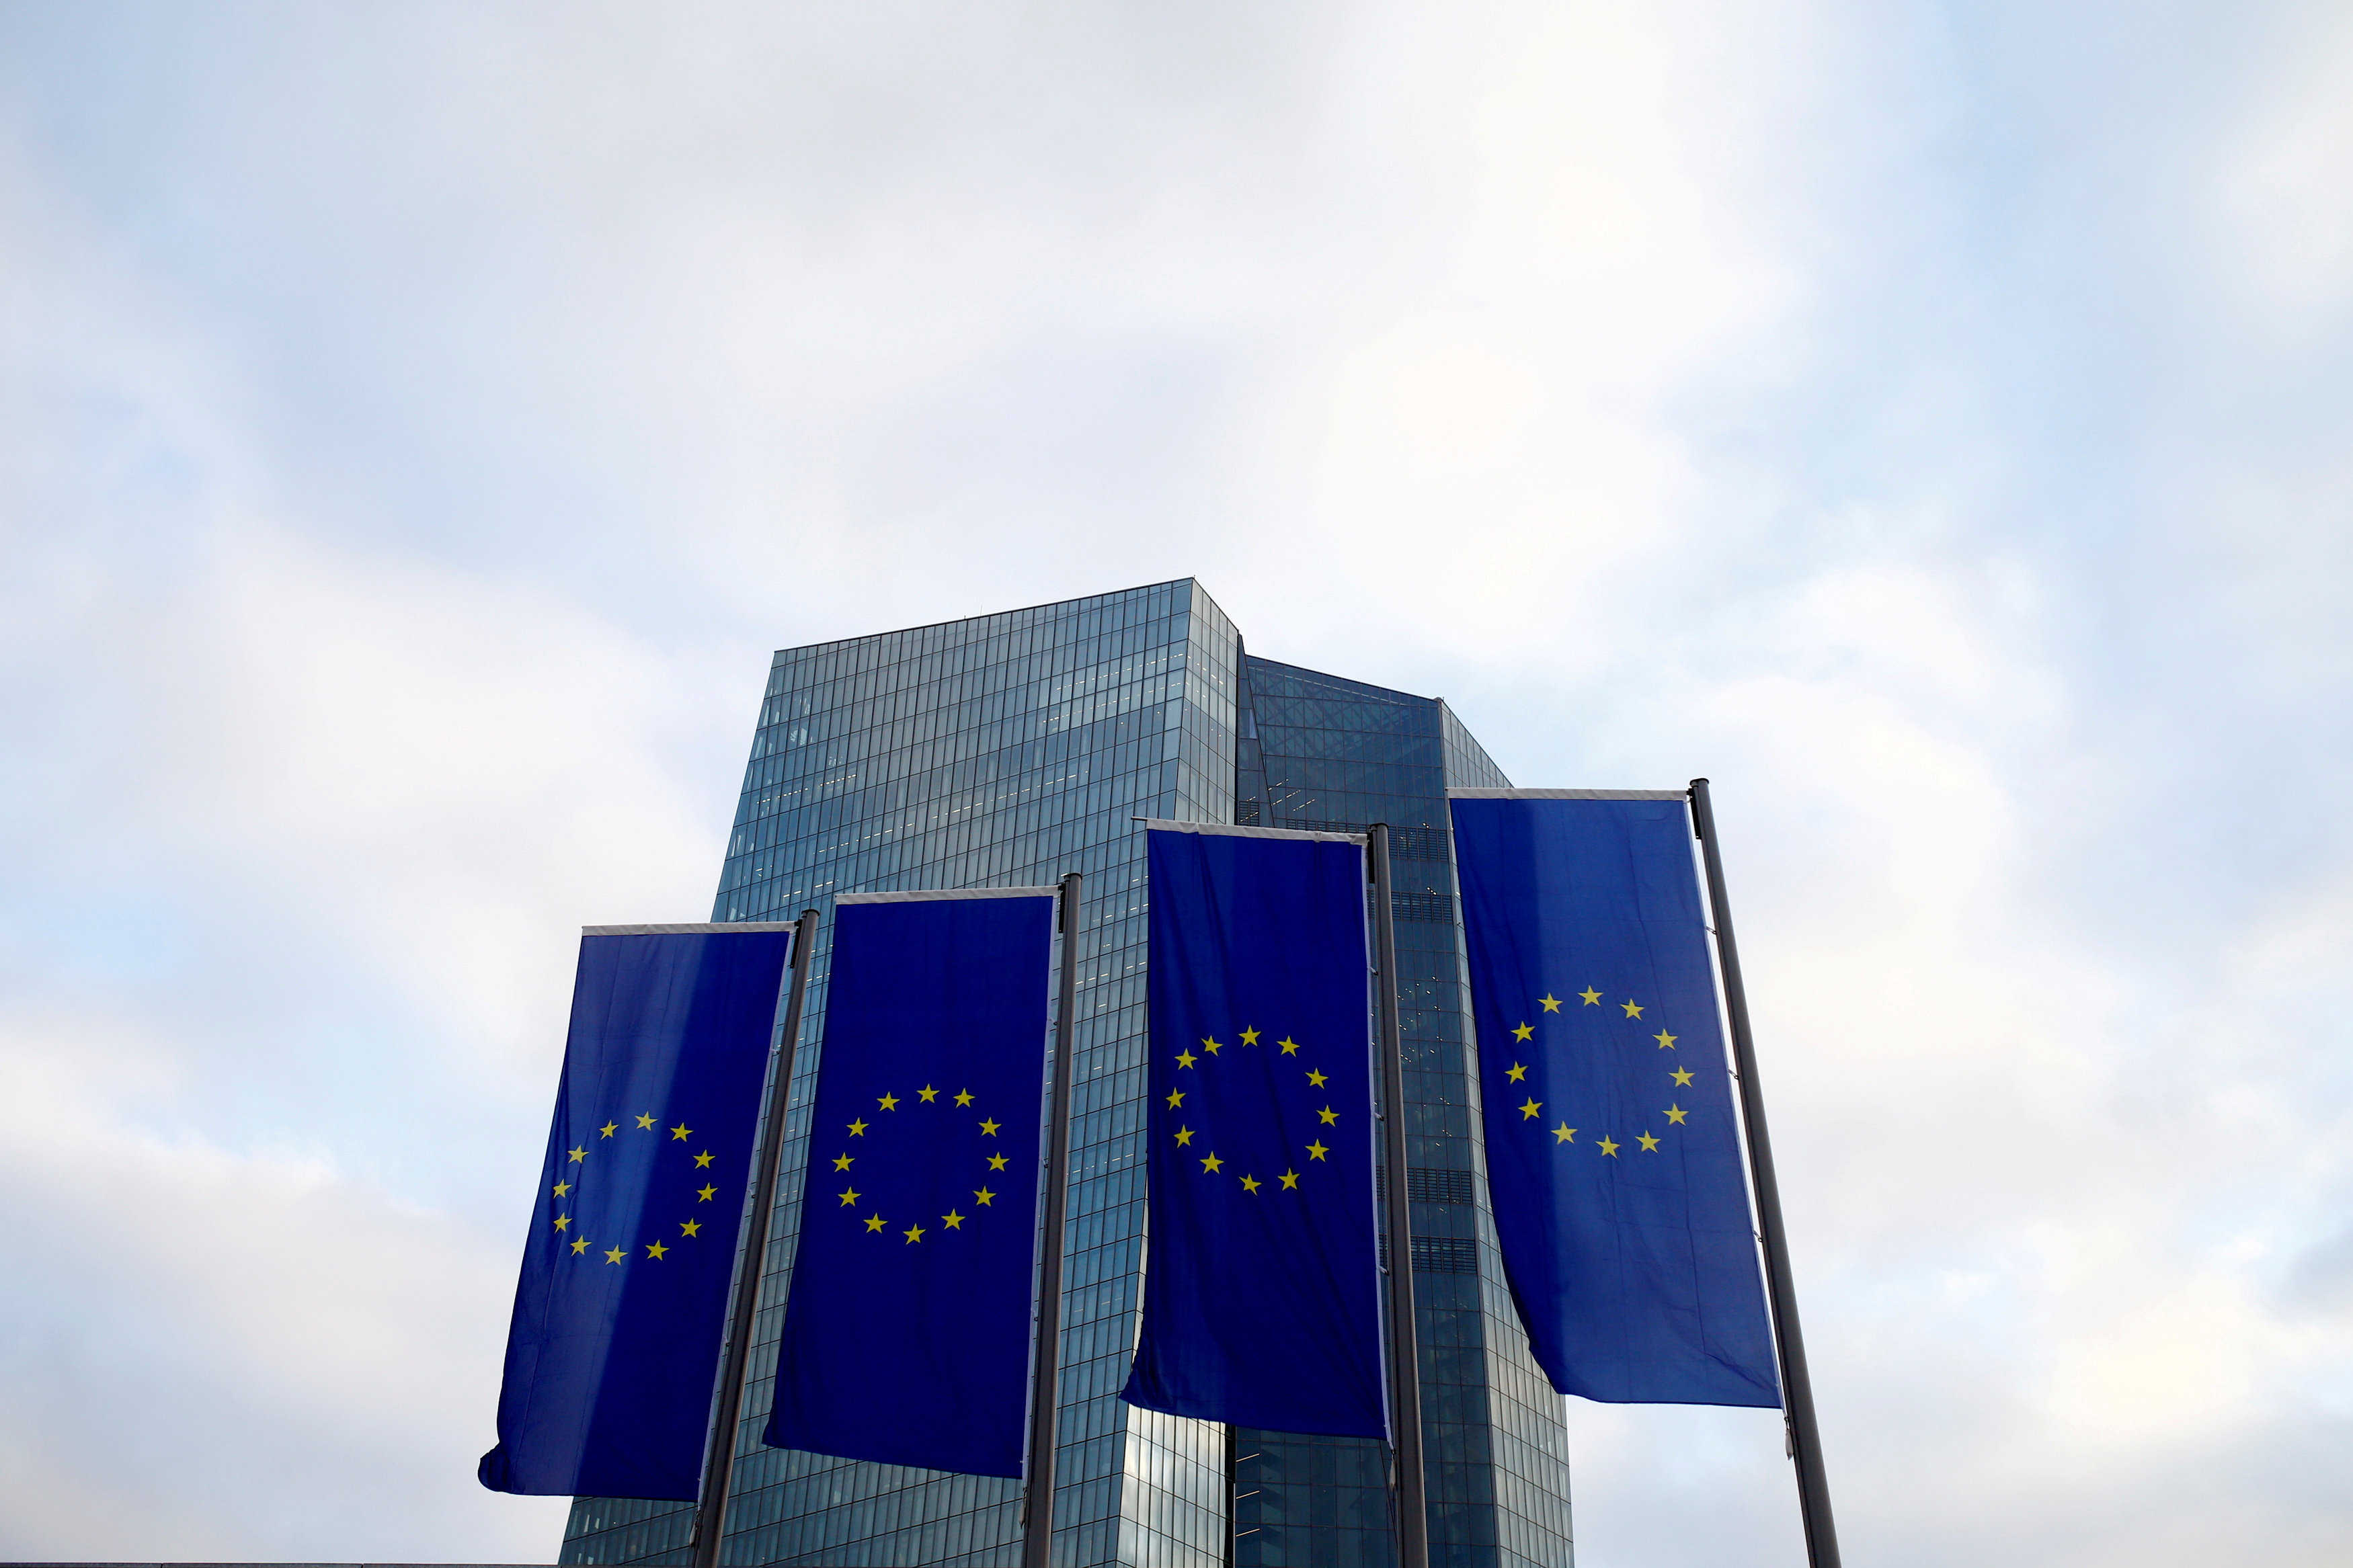 EU flags fly in front of European Central Bank headquarters in Frankfurt